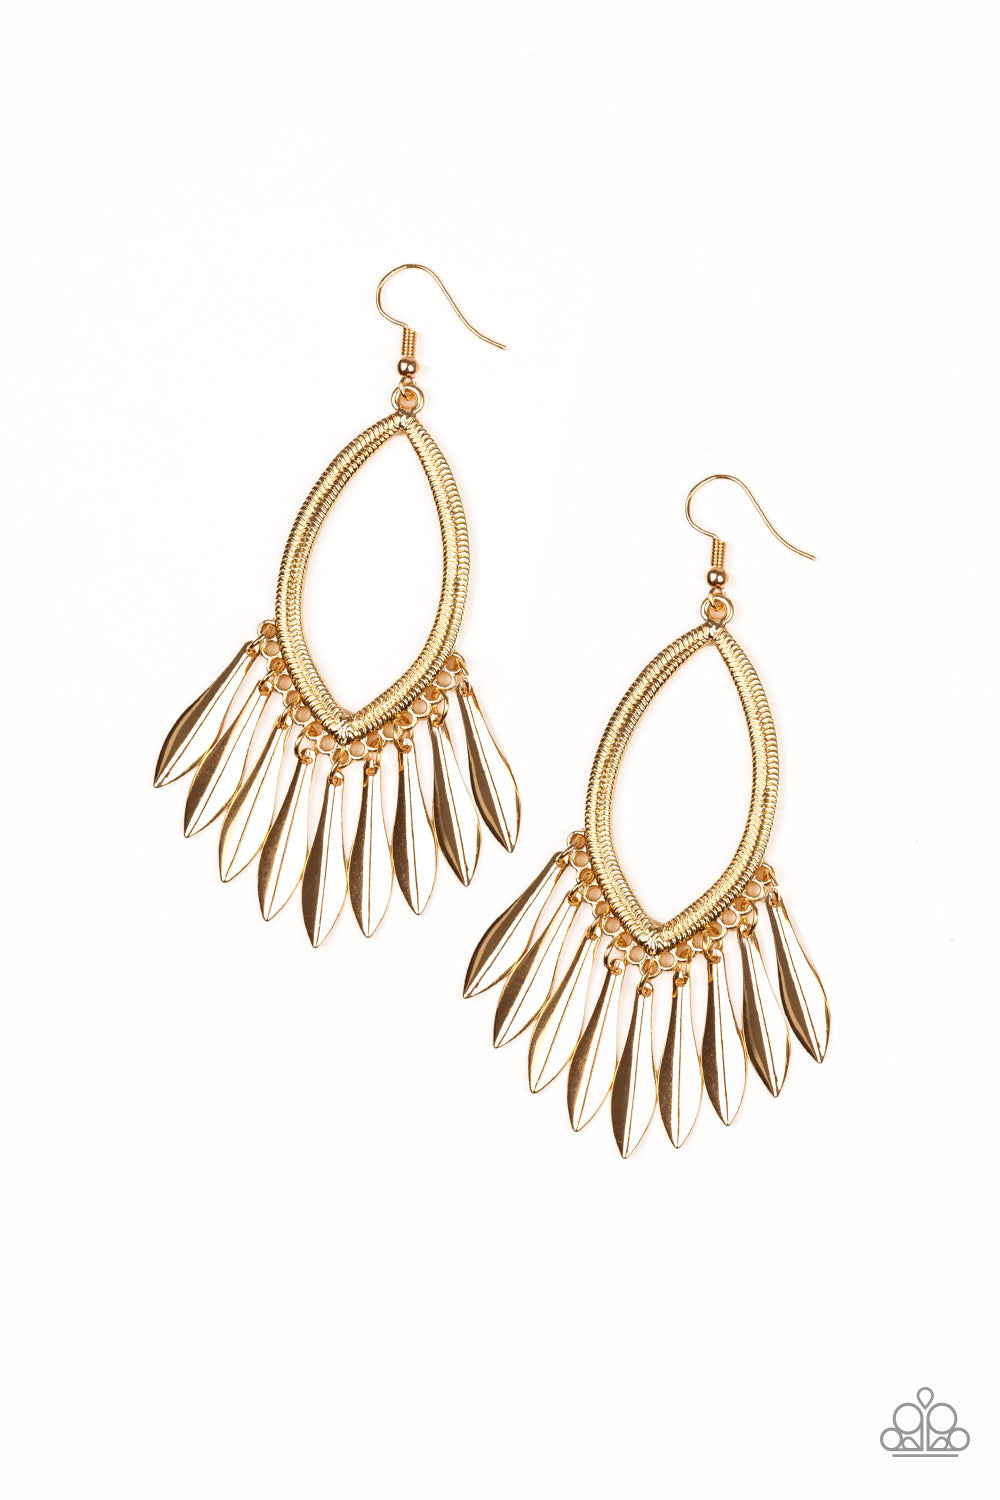 MY FLAIR LADY - GOLD EARRING